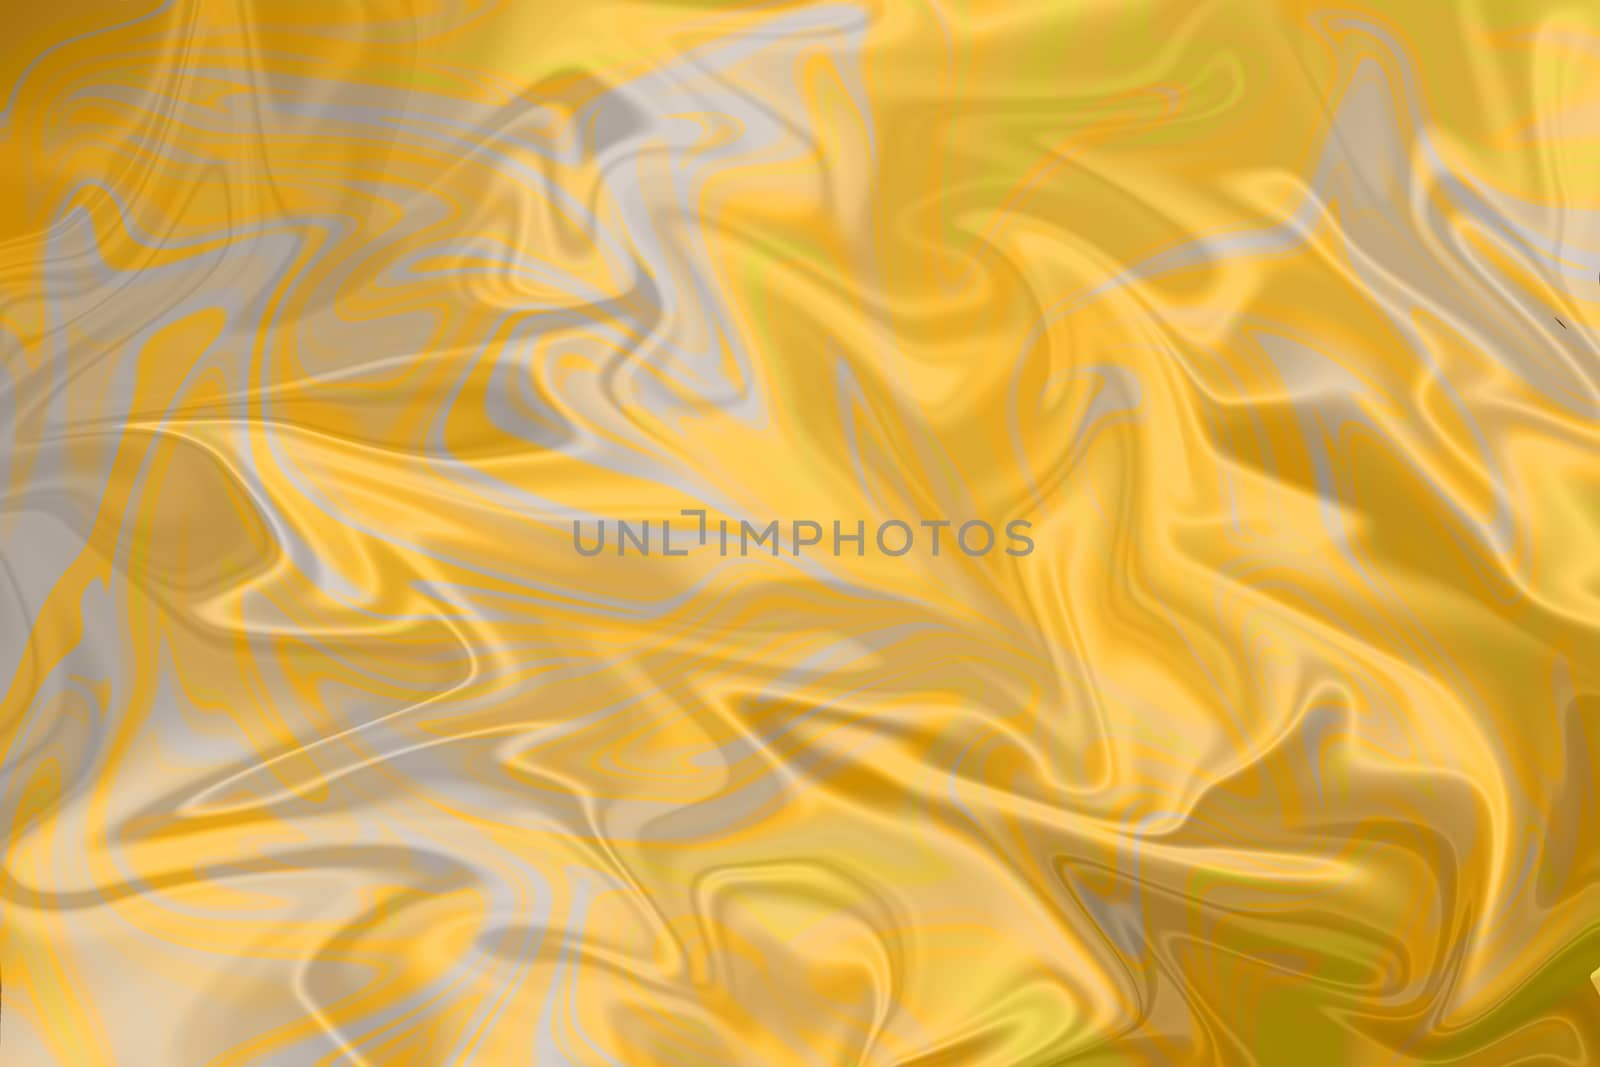 Gold liquid paint marbling and acrylic waves texture background.